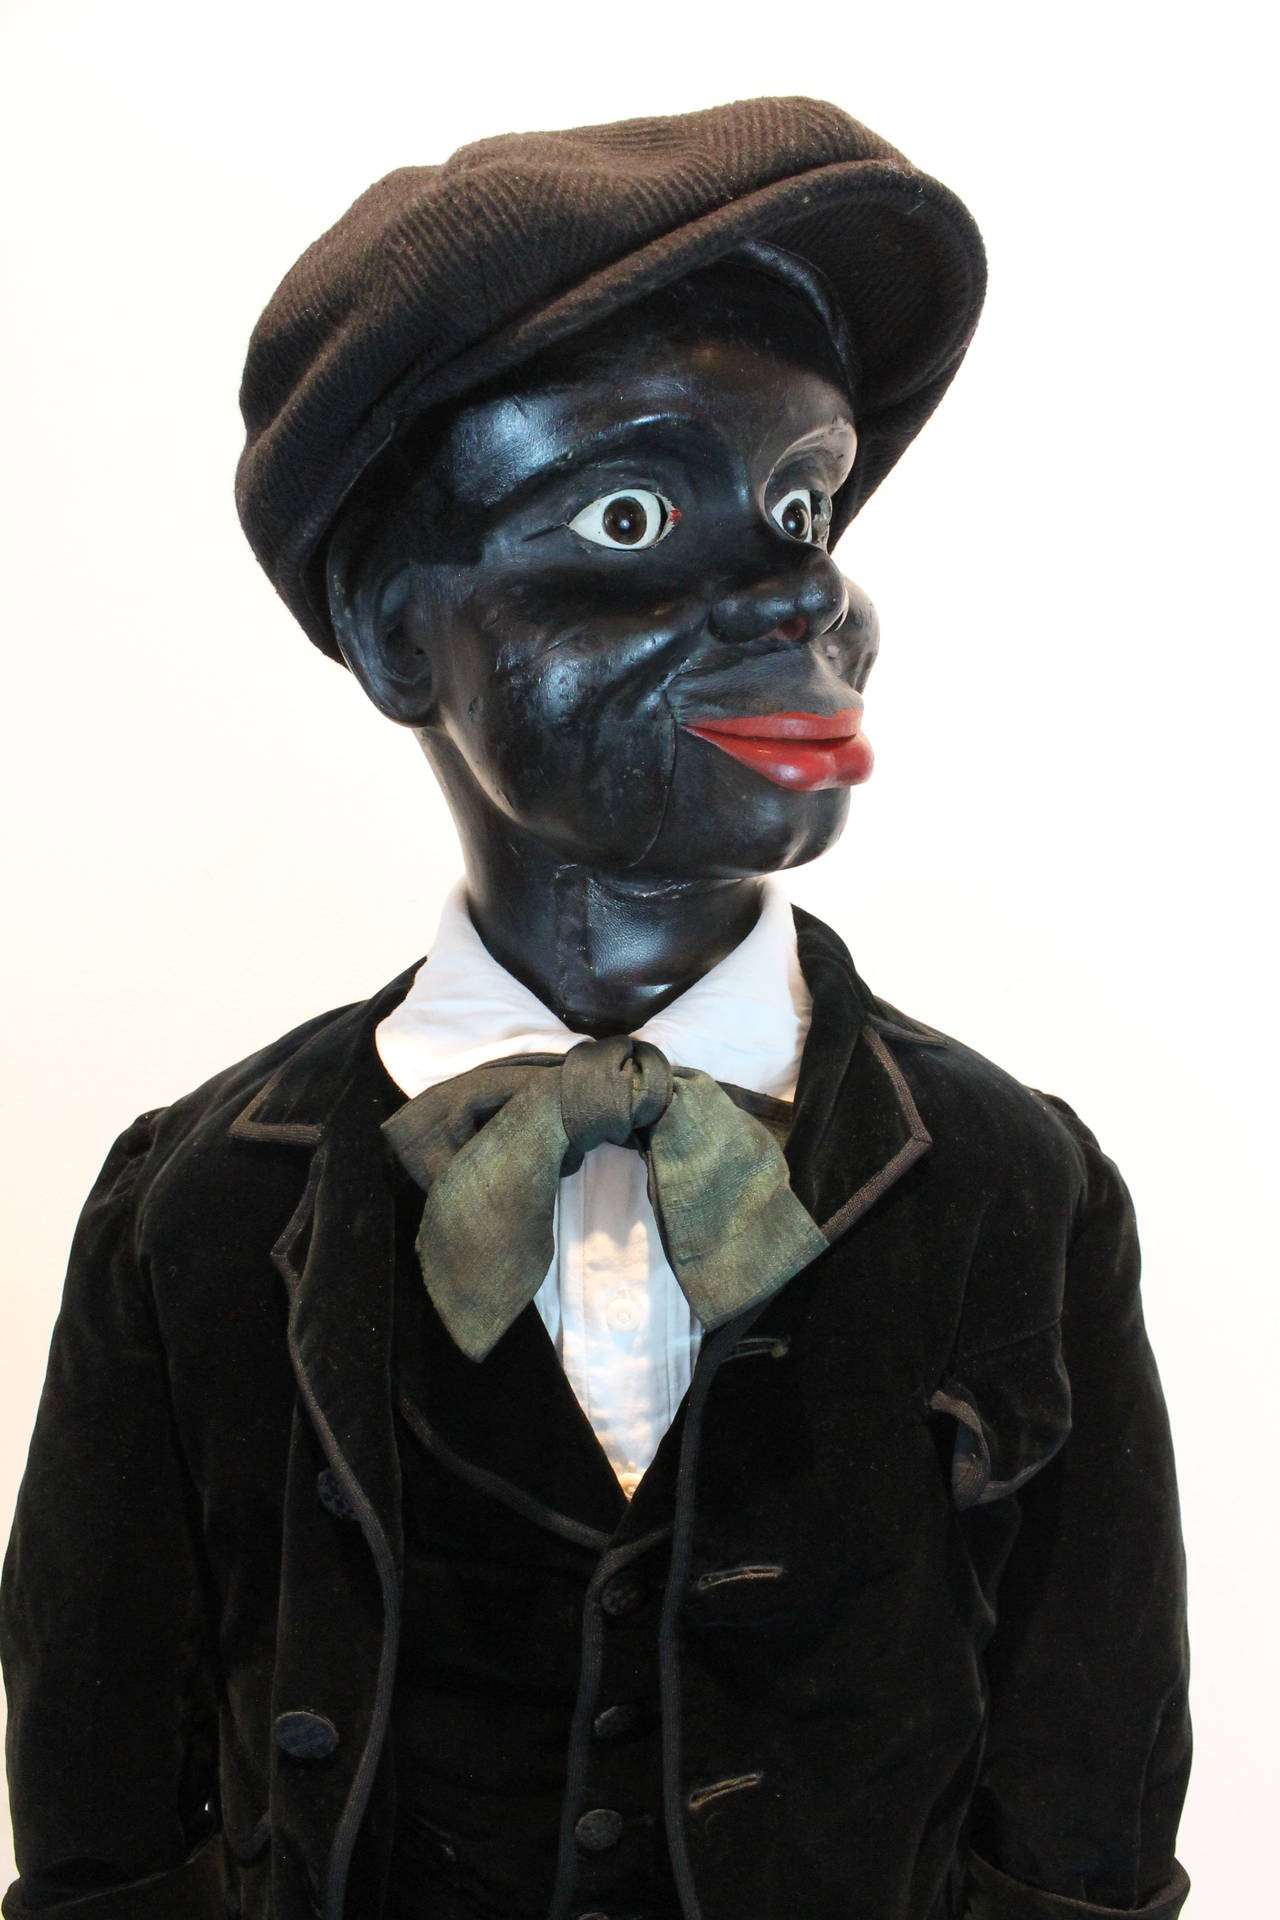 Wonderful dapper ventriloquist dummy with a very expressive carved wooden face. The head rotates, the jaw and upper lip are controlled separately. The glass eyes also move. The upper lip is leather.
The hands are carved wood with a section of the